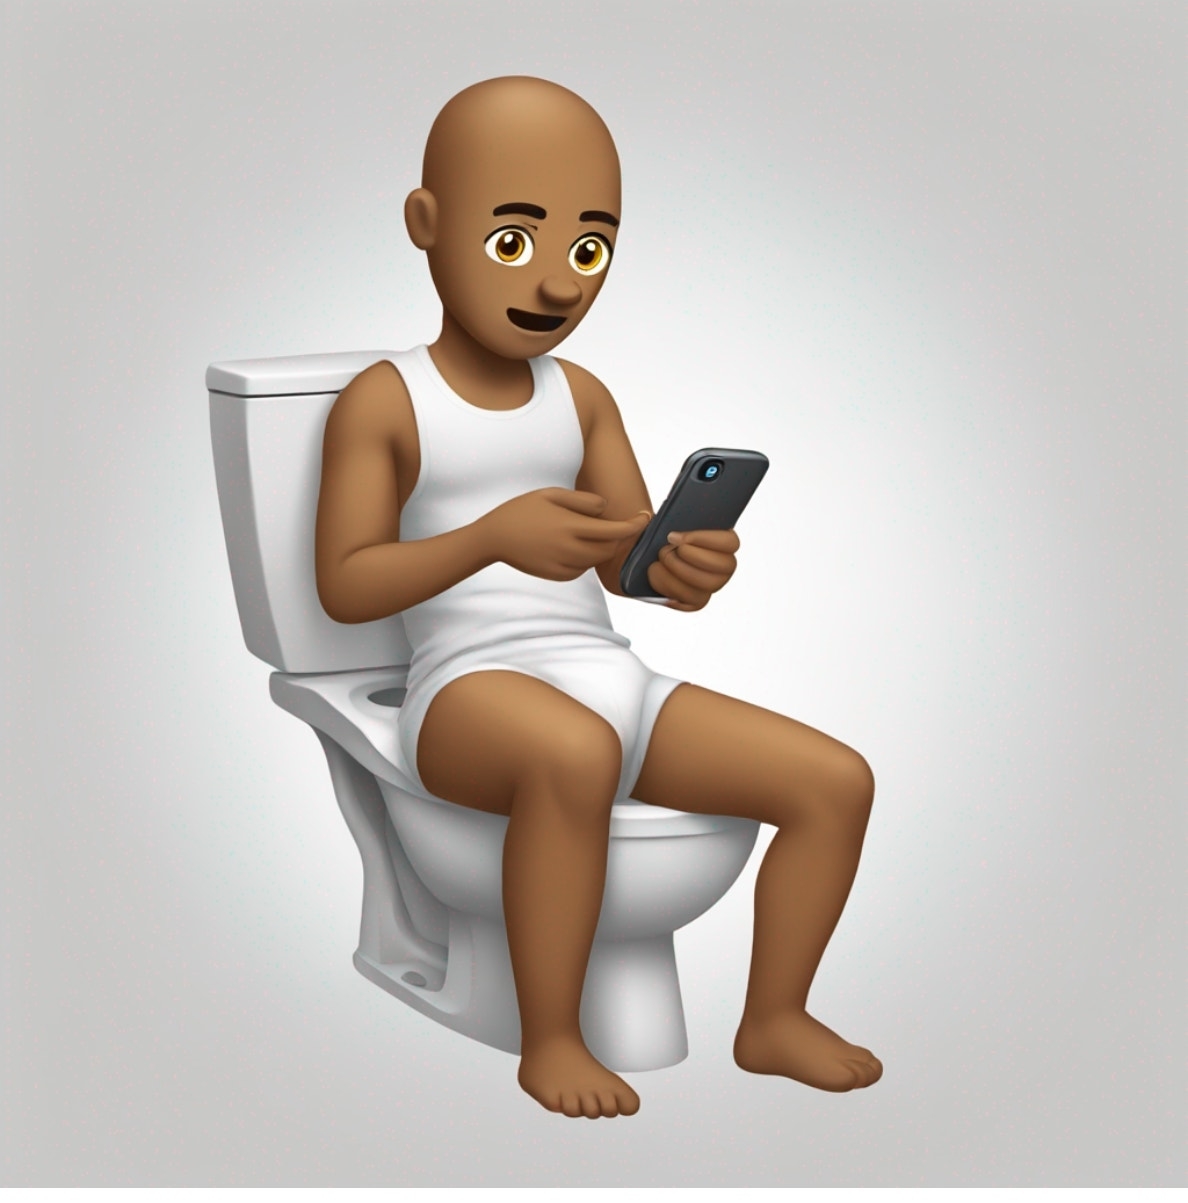 Emoji of a bald person in a tank top using a smartphone while sitting on a toilet